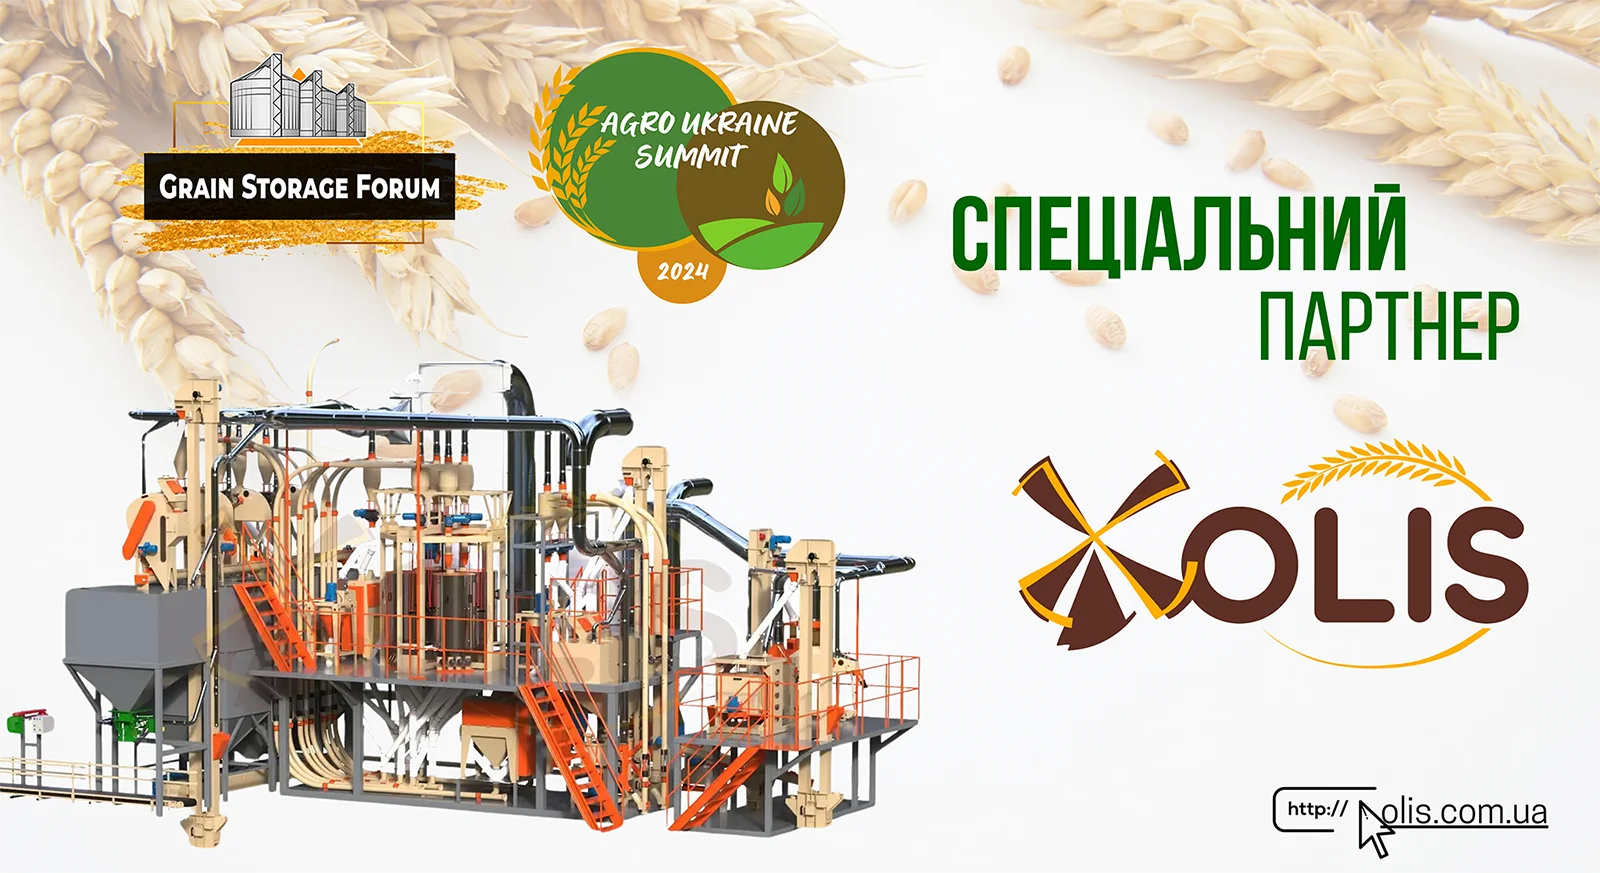 OLIS is a special partner of the Grain Storage Forum